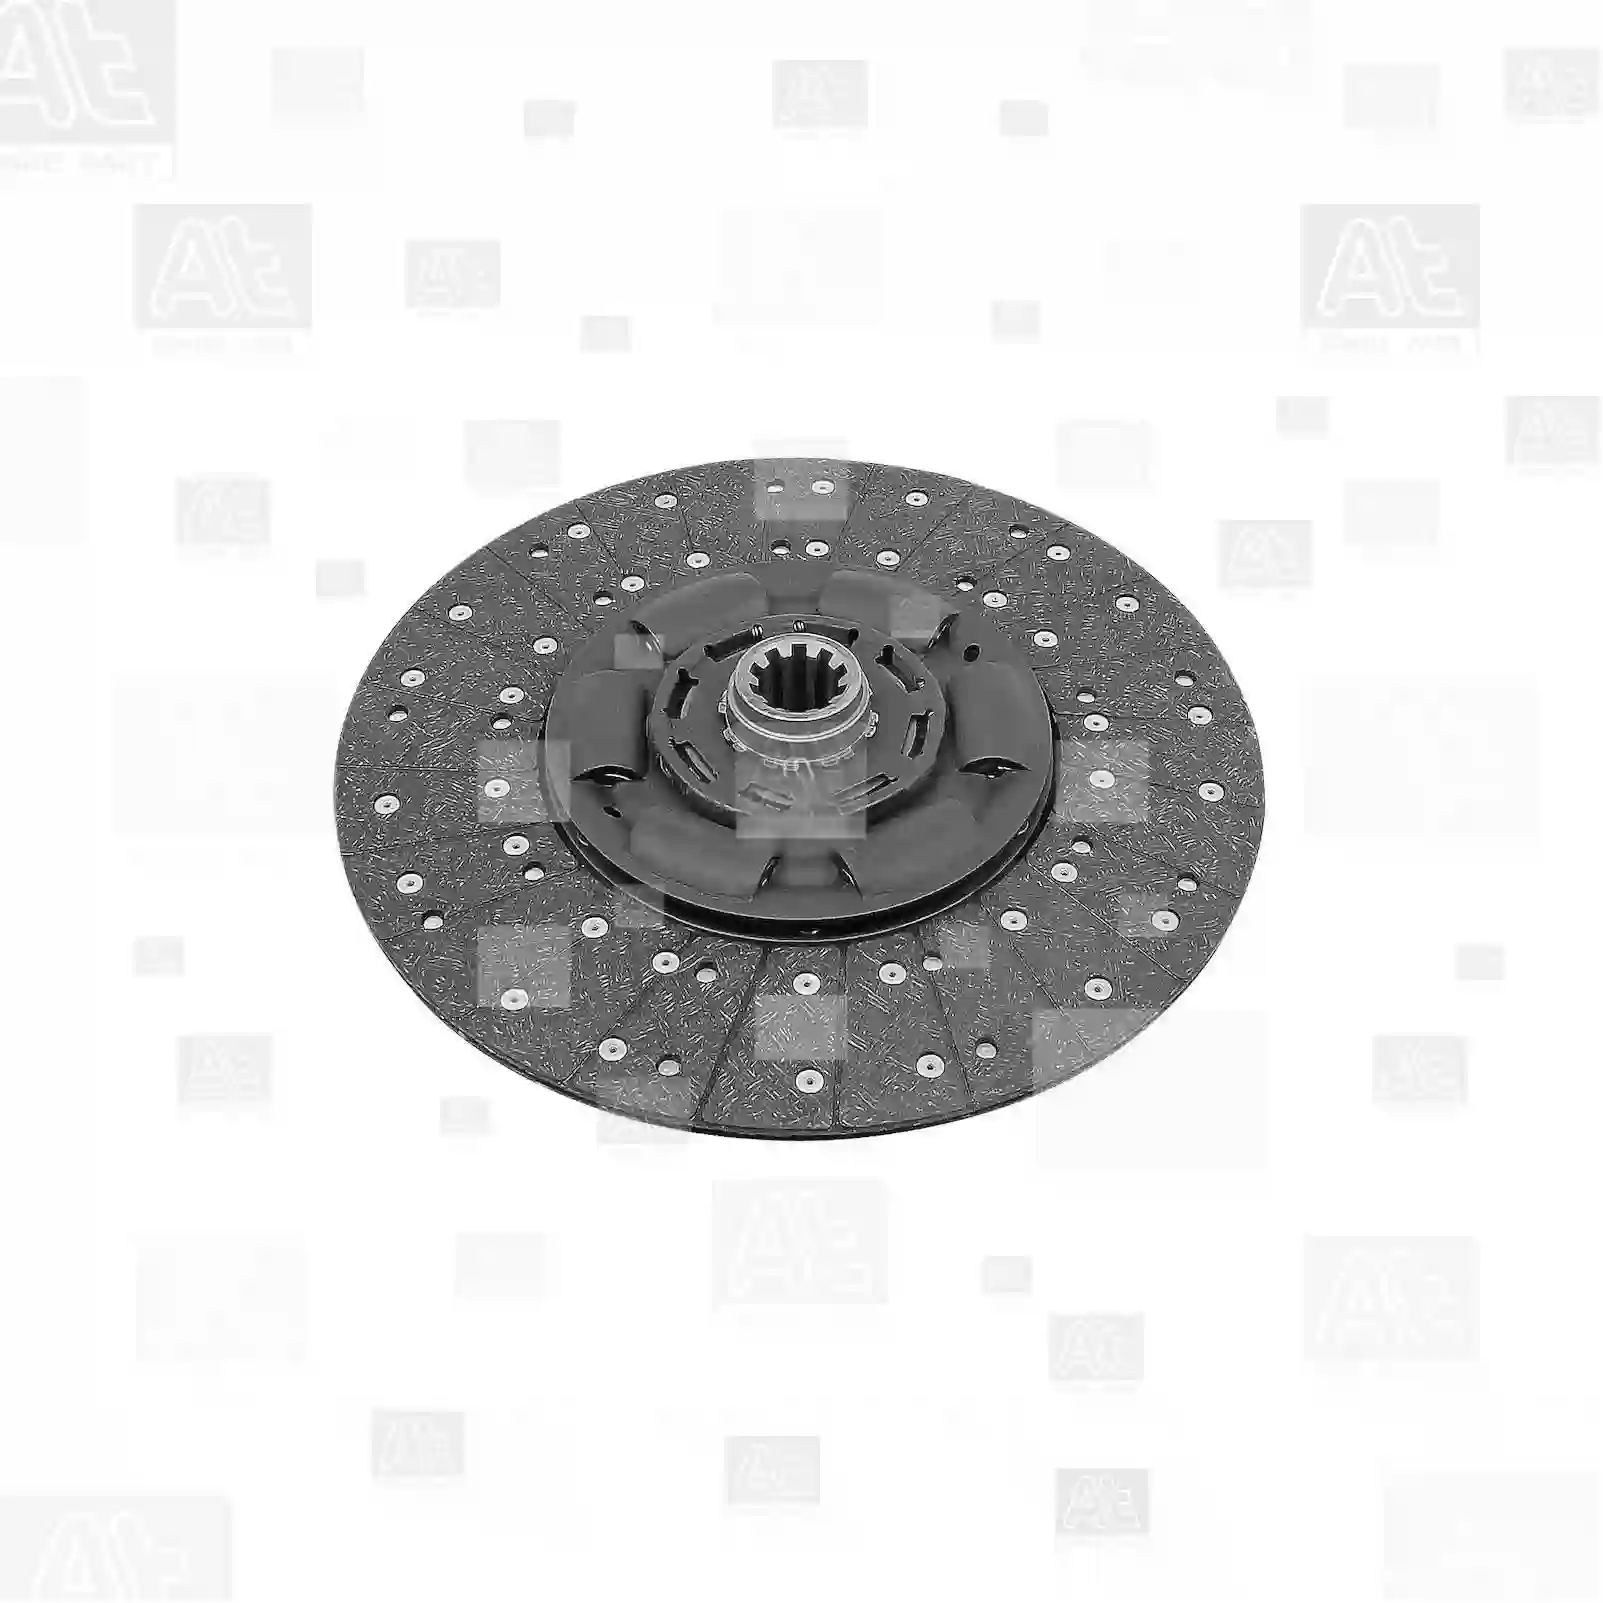 Clutch disc, at no 77721906, oem no: 81303010353, 81303010358, 81303010377, 81303010462, 81303010463, 81303019358, 81303019377, 81303019462, 81303019463, DO16365, 0012503003, 0092501903, 0112503003, 0122505803, 0132501303, 0132501403, 0132501803, 0132502503, 0132502703, 0132504203, 0142509703, 0152503903, 0162500703, 0162500803, 0162501203, 0162501303, 0162502603, 0162502903, 0162504703, 0172508503, 0172509003, 0192500403, 0202507903, 0202508003, 0202508103, 0202509703, 011010005, 042132710, 81303010377, 8383310000, 8383322000, 8383347000C At Spare Part | Engine, Accelerator Pedal, Camshaft, Connecting Rod, Crankcase, Crankshaft, Cylinder Head, Engine Suspension Mountings, Exhaust Manifold, Exhaust Gas Recirculation, Filter Kits, Flywheel Housing, General Overhaul Kits, Engine, Intake Manifold, Oil Cleaner, Oil Cooler, Oil Filter, Oil Pump, Oil Sump, Piston & Liner, Sensor & Switch, Timing Case, Turbocharger, Cooling System, Belt Tensioner, Coolant Filter, Coolant Pipe, Corrosion Prevention Agent, Drive, Expansion Tank, Fan, Intercooler, Monitors & Gauges, Radiator, Thermostat, V-Belt / Timing belt, Water Pump, Fuel System, Electronical Injector Unit, Feed Pump, Fuel Filter, cpl., Fuel Gauge Sender,  Fuel Line, Fuel Pump, Fuel Tank, Injection Line Kit, Injection Pump, Exhaust System, Clutch & Pedal, Gearbox, Propeller Shaft, Axles, Brake System, Hubs & Wheels, Suspension, Leaf Spring, Universal Parts / Accessories, Steering, Electrical System, Cabin Clutch disc, at no 77721906, oem no: 81303010353, 81303010358, 81303010377, 81303010462, 81303010463, 81303019358, 81303019377, 81303019462, 81303019463, DO16365, 0012503003, 0092501903, 0112503003, 0122505803, 0132501303, 0132501403, 0132501803, 0132502503, 0132502703, 0132504203, 0142509703, 0152503903, 0162500703, 0162500803, 0162501203, 0162501303, 0162502603, 0162502903, 0162504703, 0172508503, 0172509003, 0192500403, 0202507903, 0202508003, 0202508103, 0202509703, 011010005, 042132710, 81303010377, 8383310000, 8383322000, 8383347000C At Spare Part | Engine, Accelerator Pedal, Camshaft, Connecting Rod, Crankcase, Crankshaft, Cylinder Head, Engine Suspension Mountings, Exhaust Manifold, Exhaust Gas Recirculation, Filter Kits, Flywheel Housing, General Overhaul Kits, Engine, Intake Manifold, Oil Cleaner, Oil Cooler, Oil Filter, Oil Pump, Oil Sump, Piston & Liner, Sensor & Switch, Timing Case, Turbocharger, Cooling System, Belt Tensioner, Coolant Filter, Coolant Pipe, Corrosion Prevention Agent, Drive, Expansion Tank, Fan, Intercooler, Monitors & Gauges, Radiator, Thermostat, V-Belt / Timing belt, Water Pump, Fuel System, Electronical Injector Unit, Feed Pump, Fuel Filter, cpl., Fuel Gauge Sender,  Fuel Line, Fuel Pump, Fuel Tank, Injection Line Kit, Injection Pump, Exhaust System, Clutch & Pedal, Gearbox, Propeller Shaft, Axles, Brake System, Hubs & Wheels, Suspension, Leaf Spring, Universal Parts / Accessories, Steering, Electrical System, Cabin